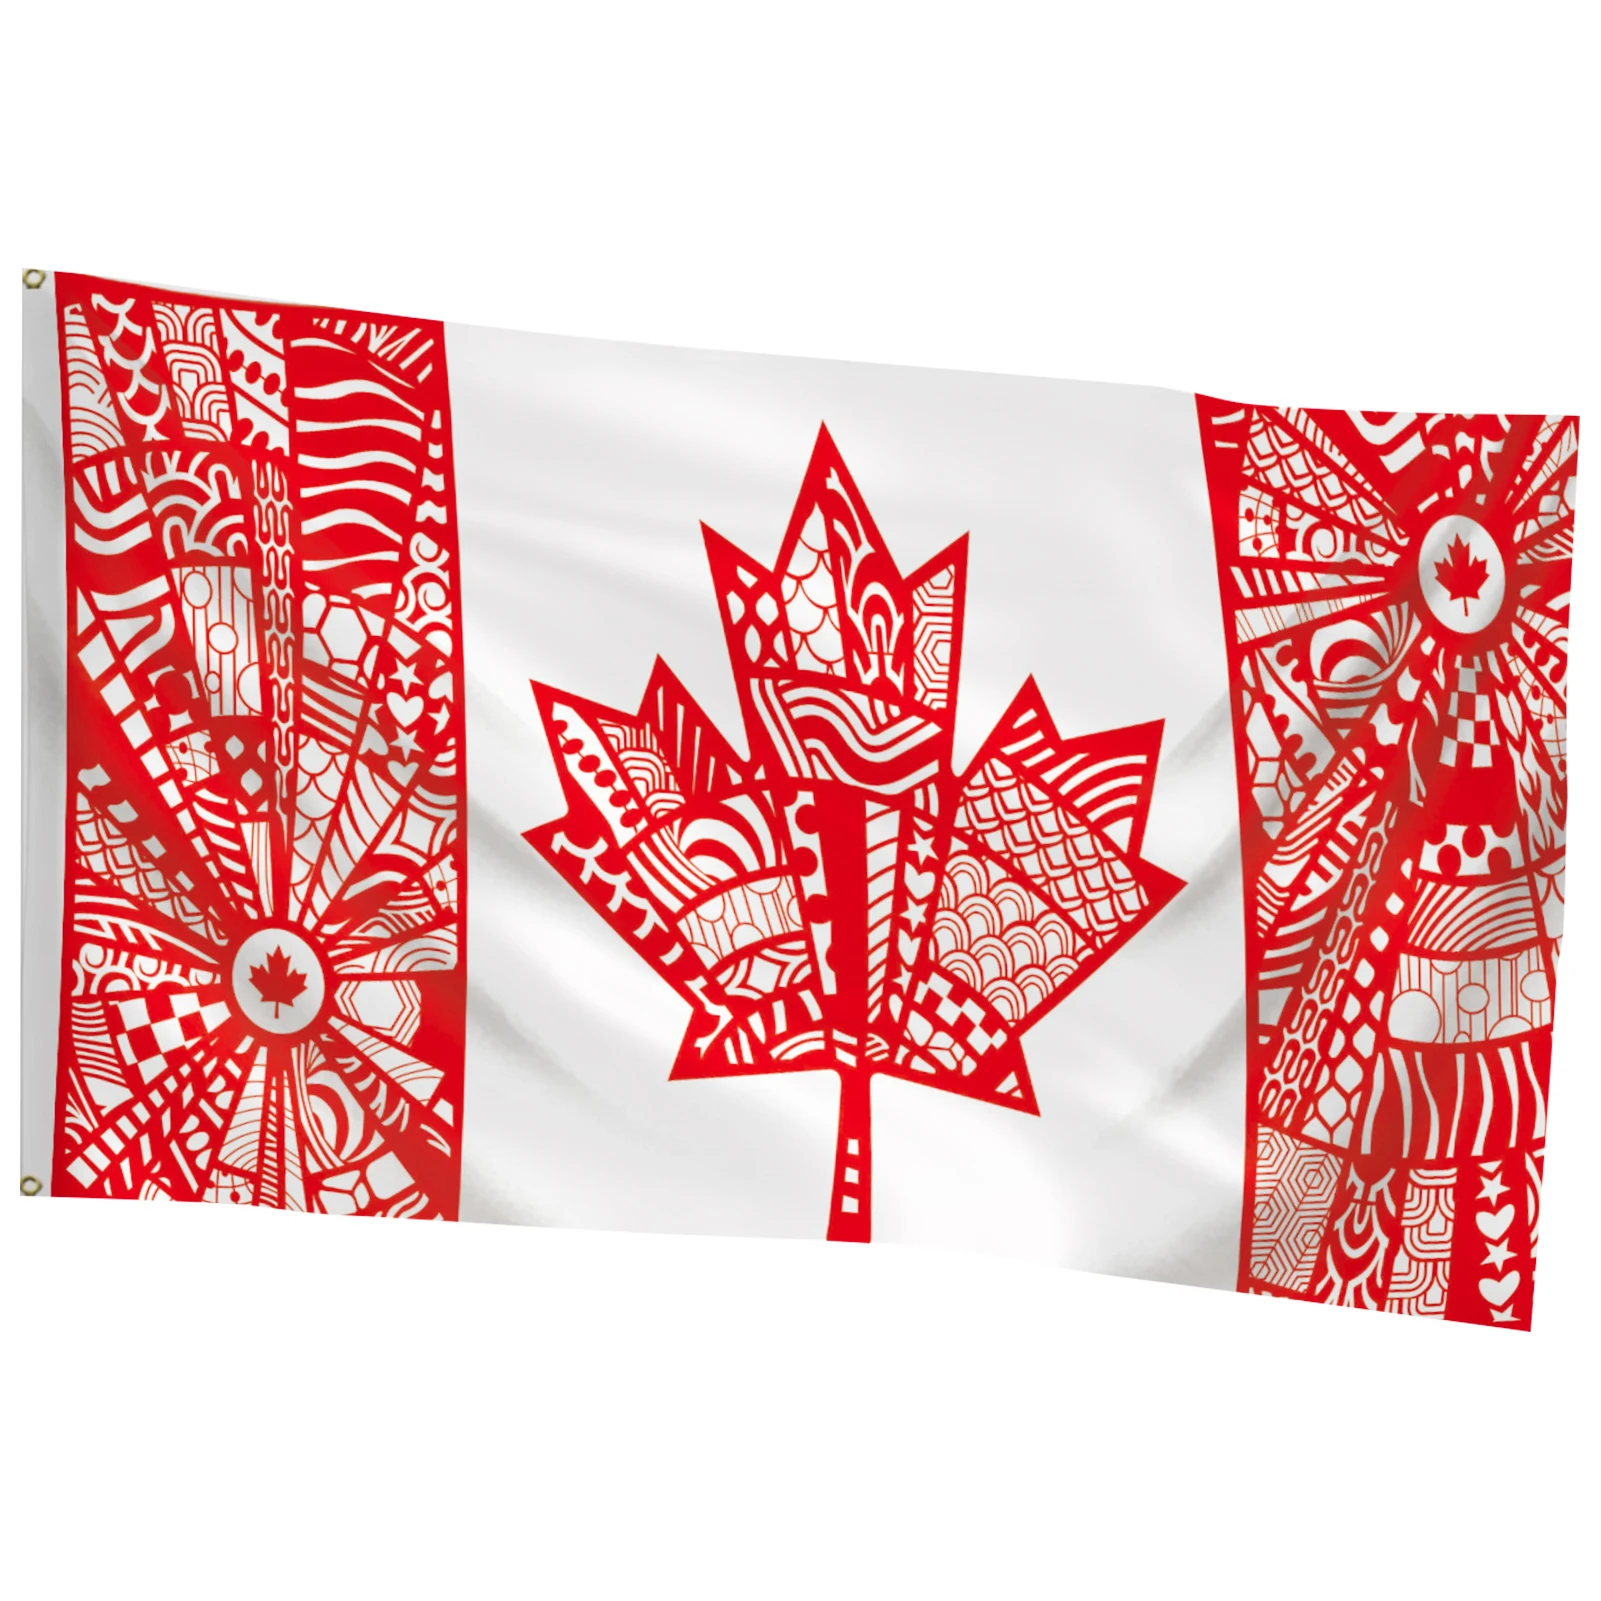 

Canada Day Garden Flag Red and White Polyester Canada Flag National Symbol for Home Outdoor Flagpole Decor CA Flag 35x59 Feet